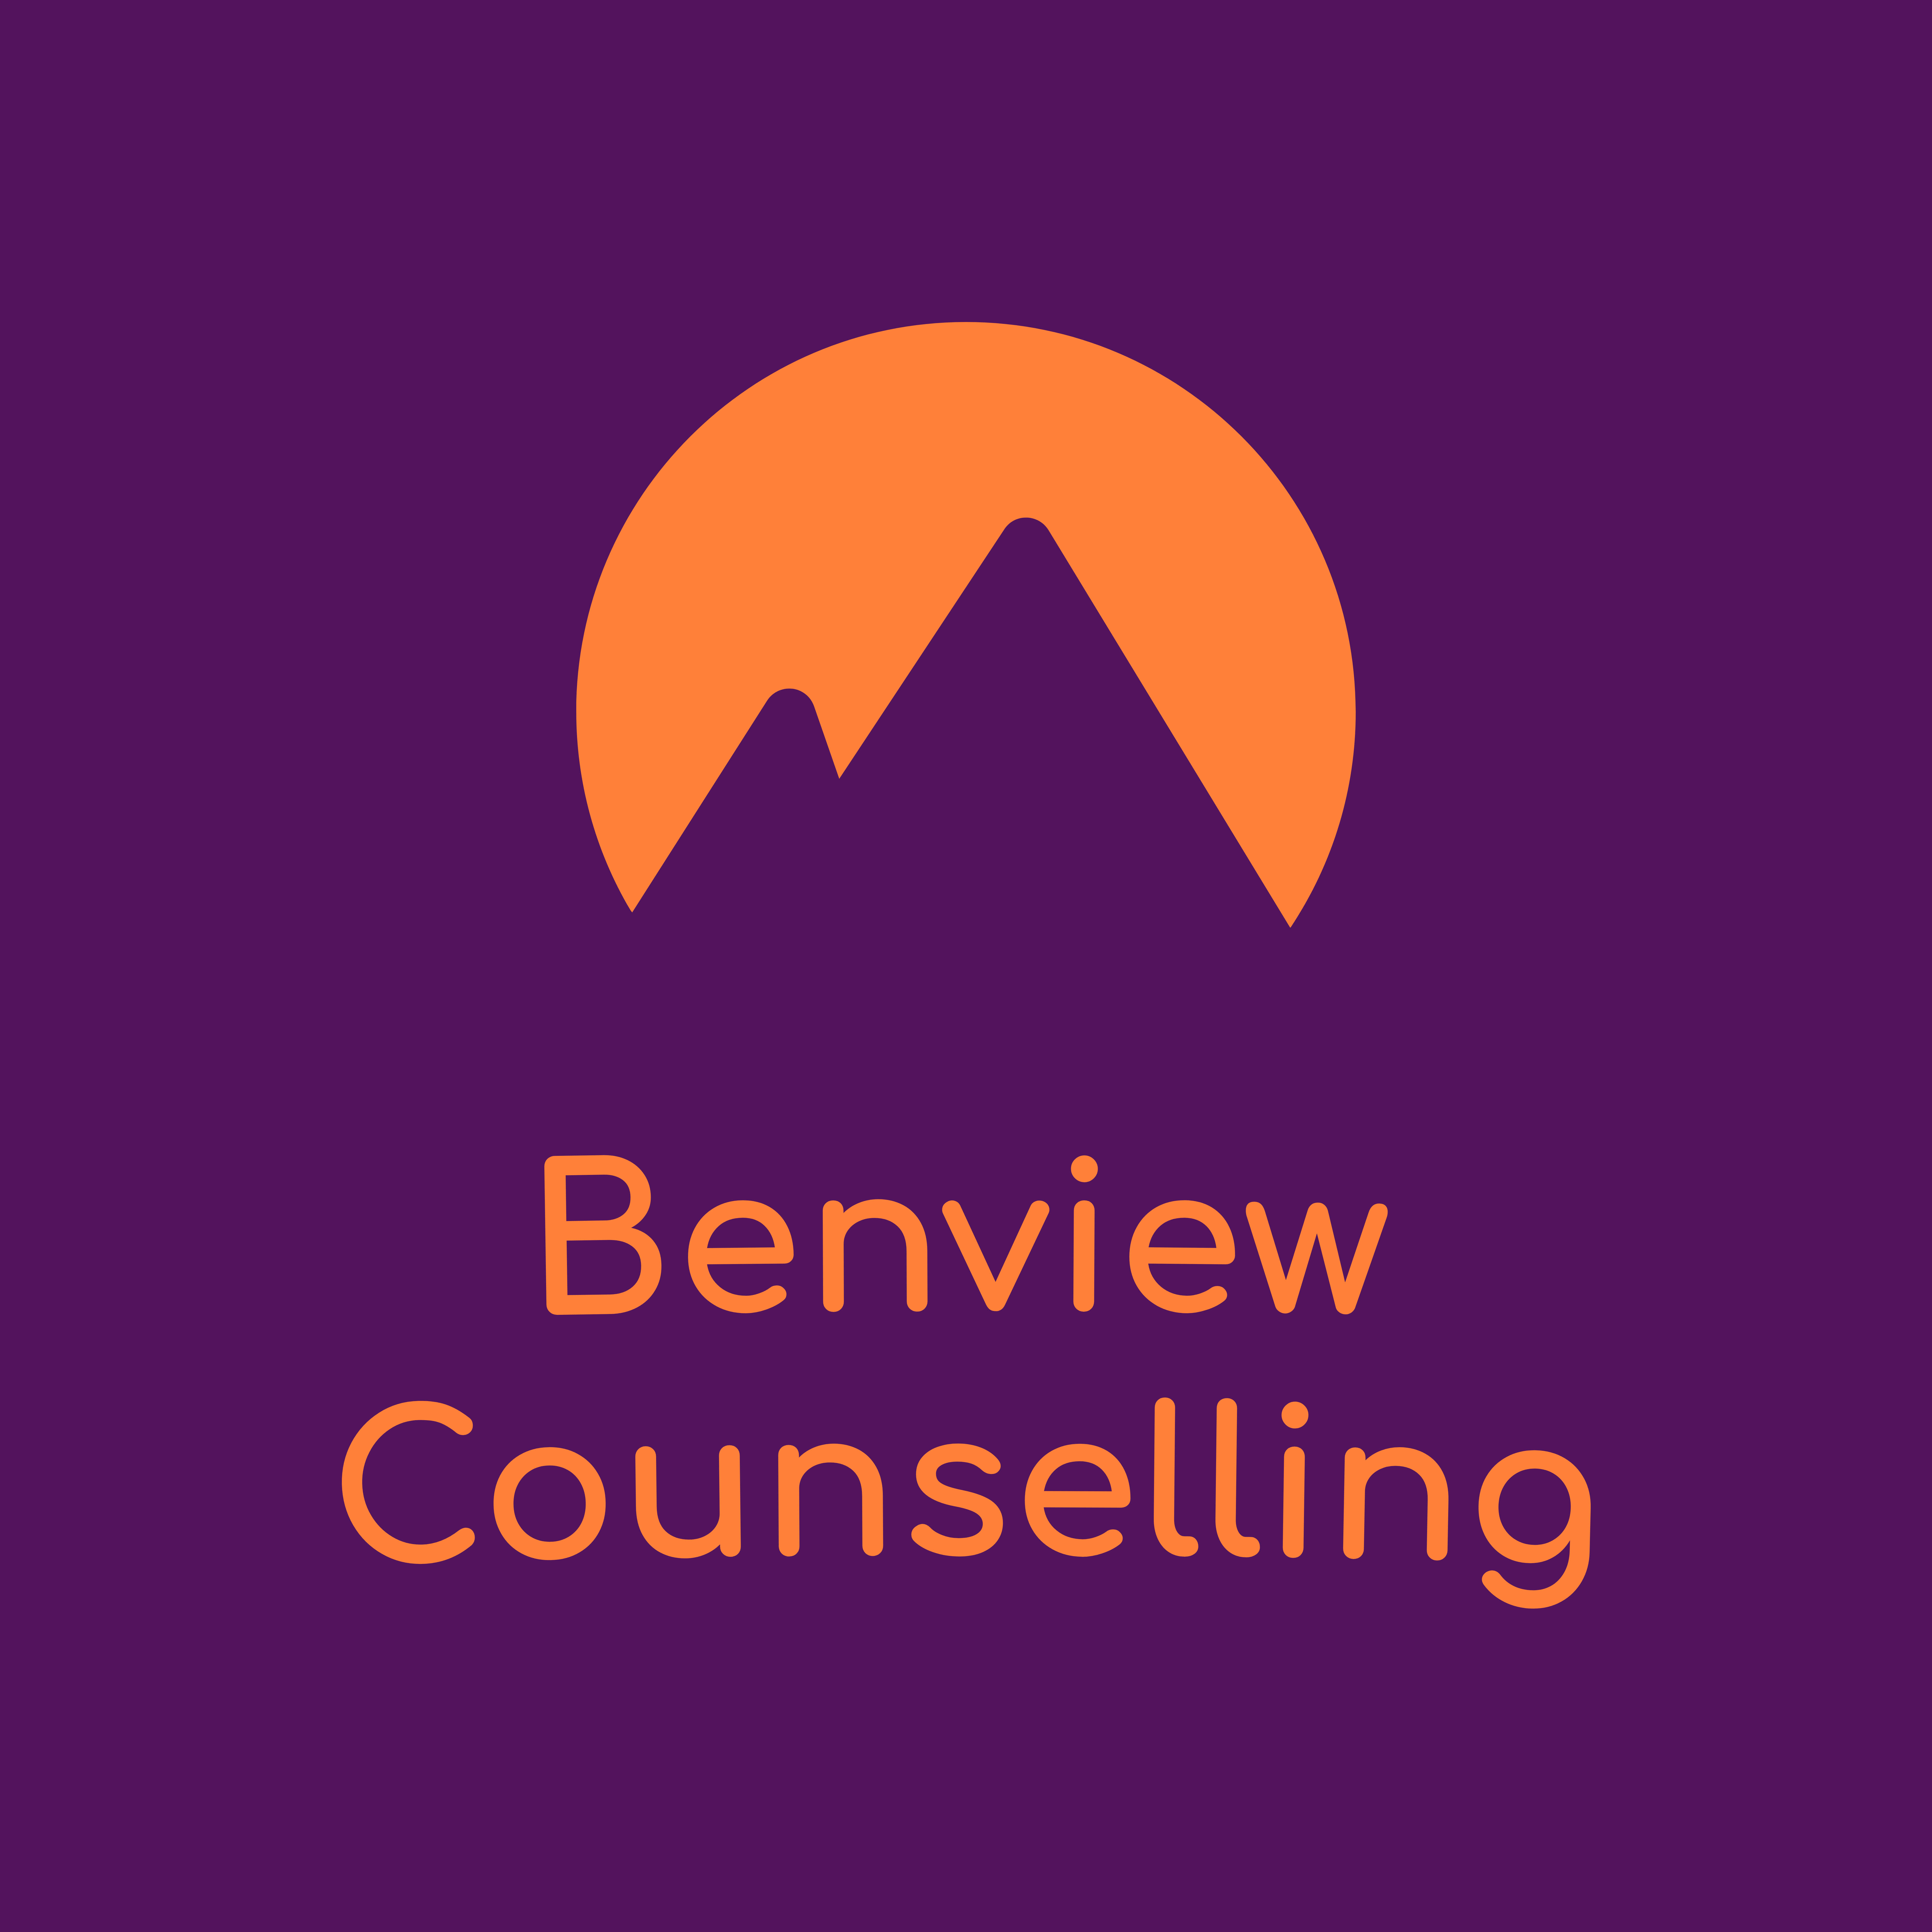 Benview Counselling